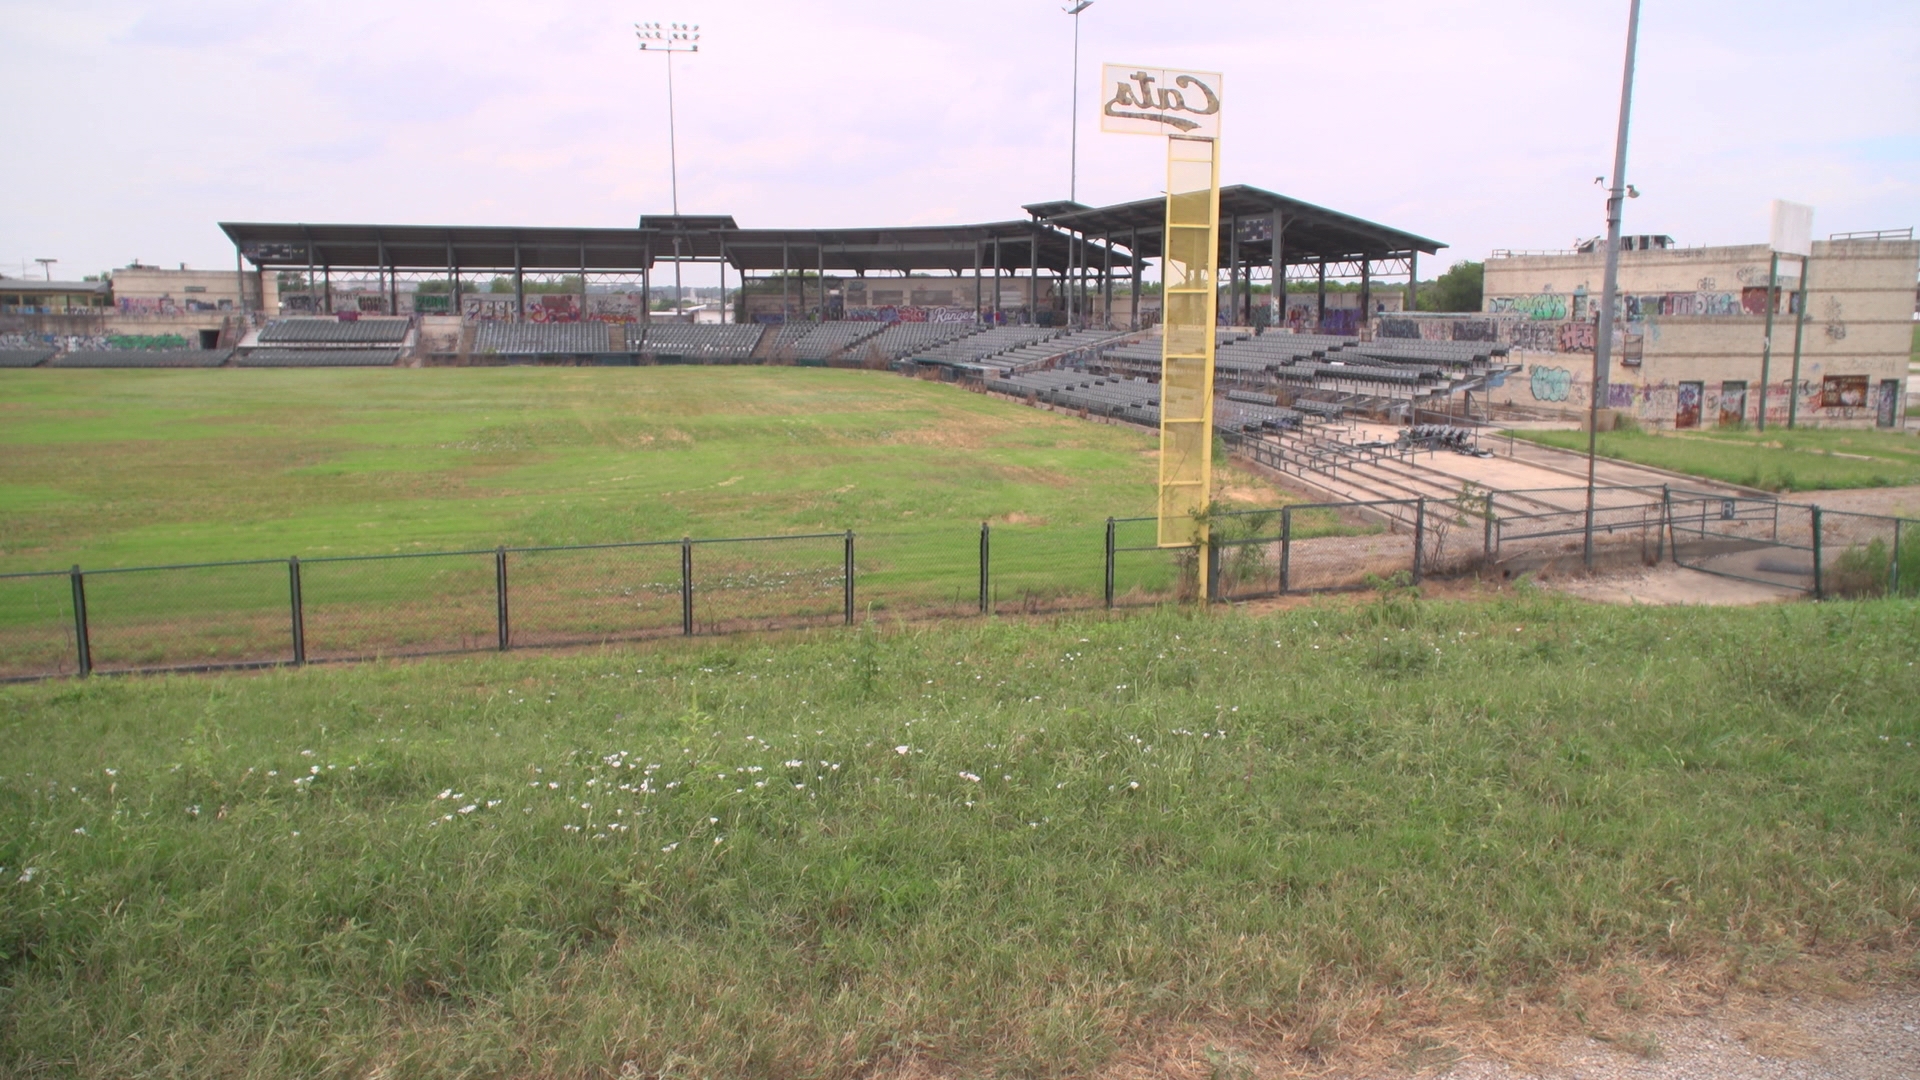 LaGrave Field has been vacant since 2014 and is set to be torn down after being deemed a risk to public safety.